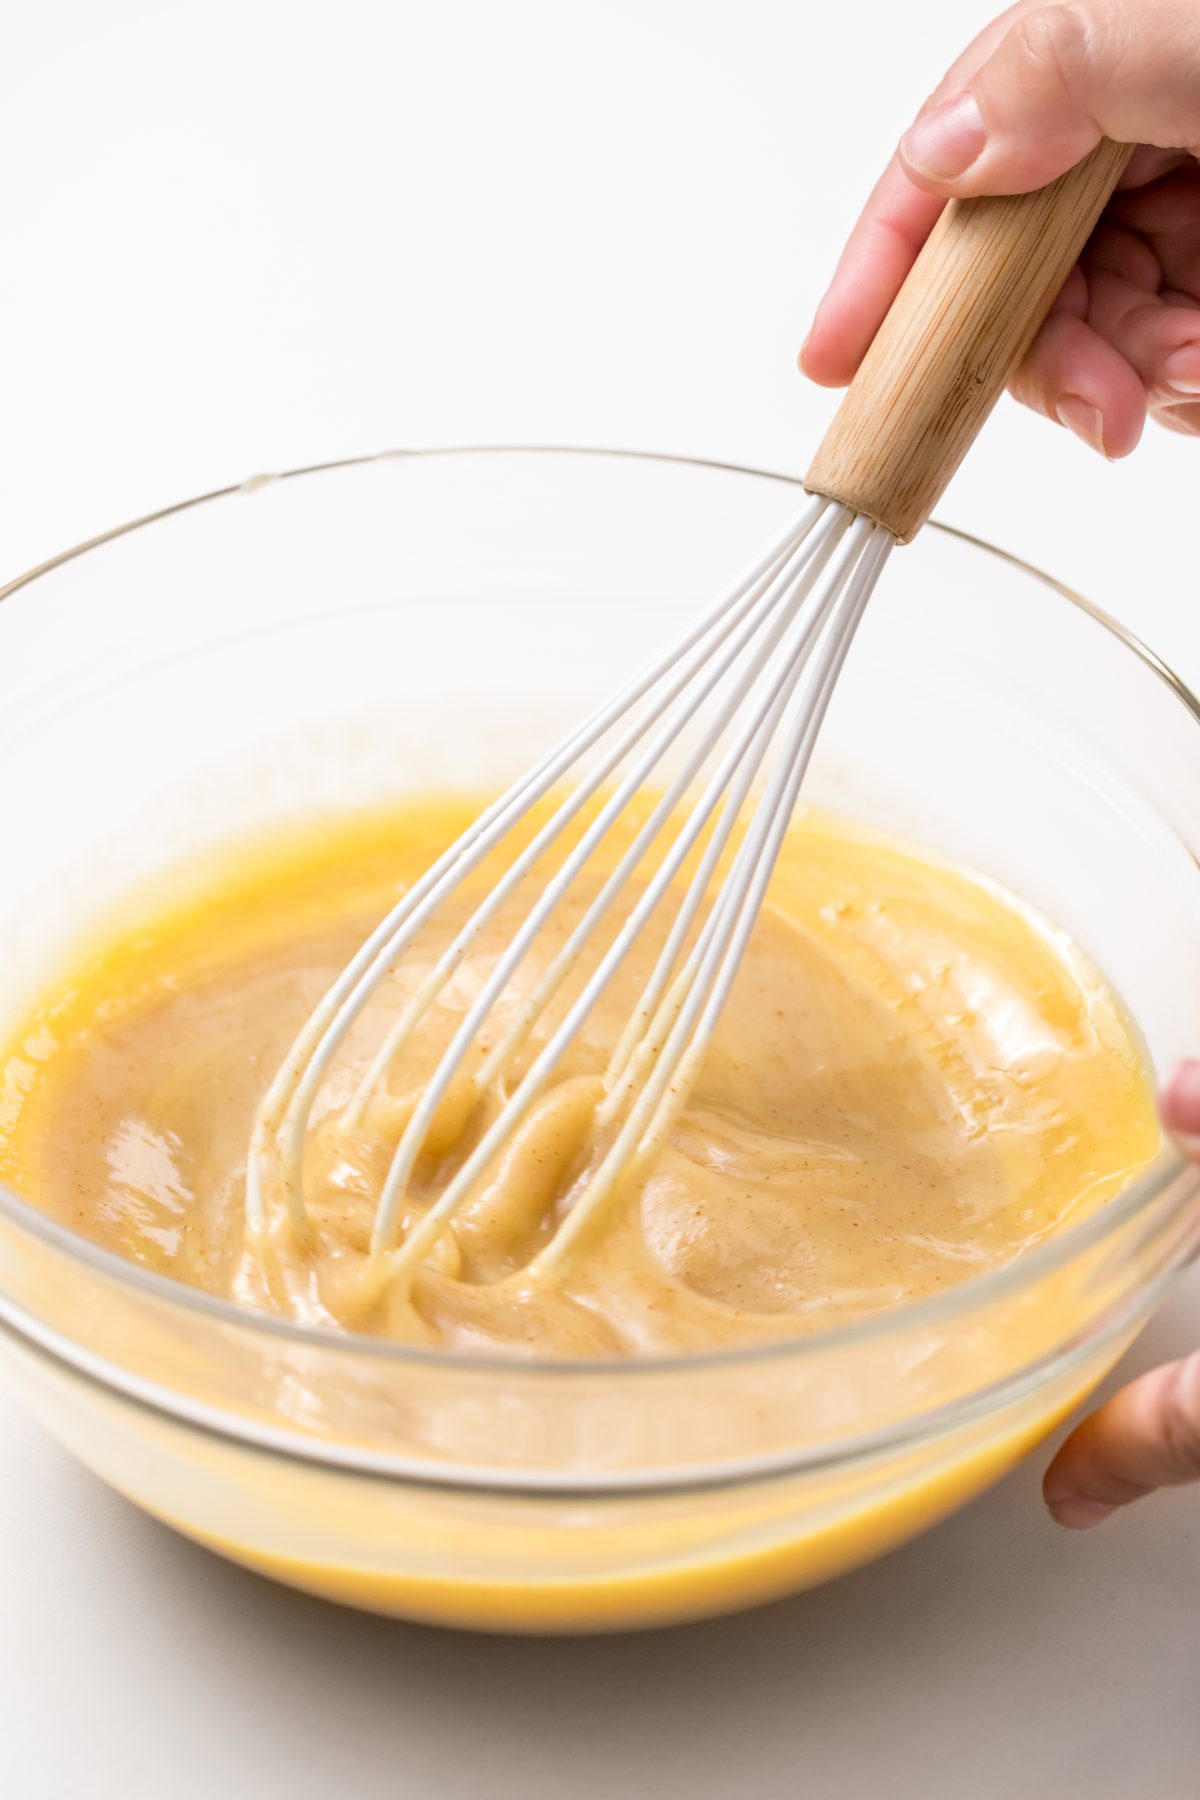 Whisk eggs into the pie filling.